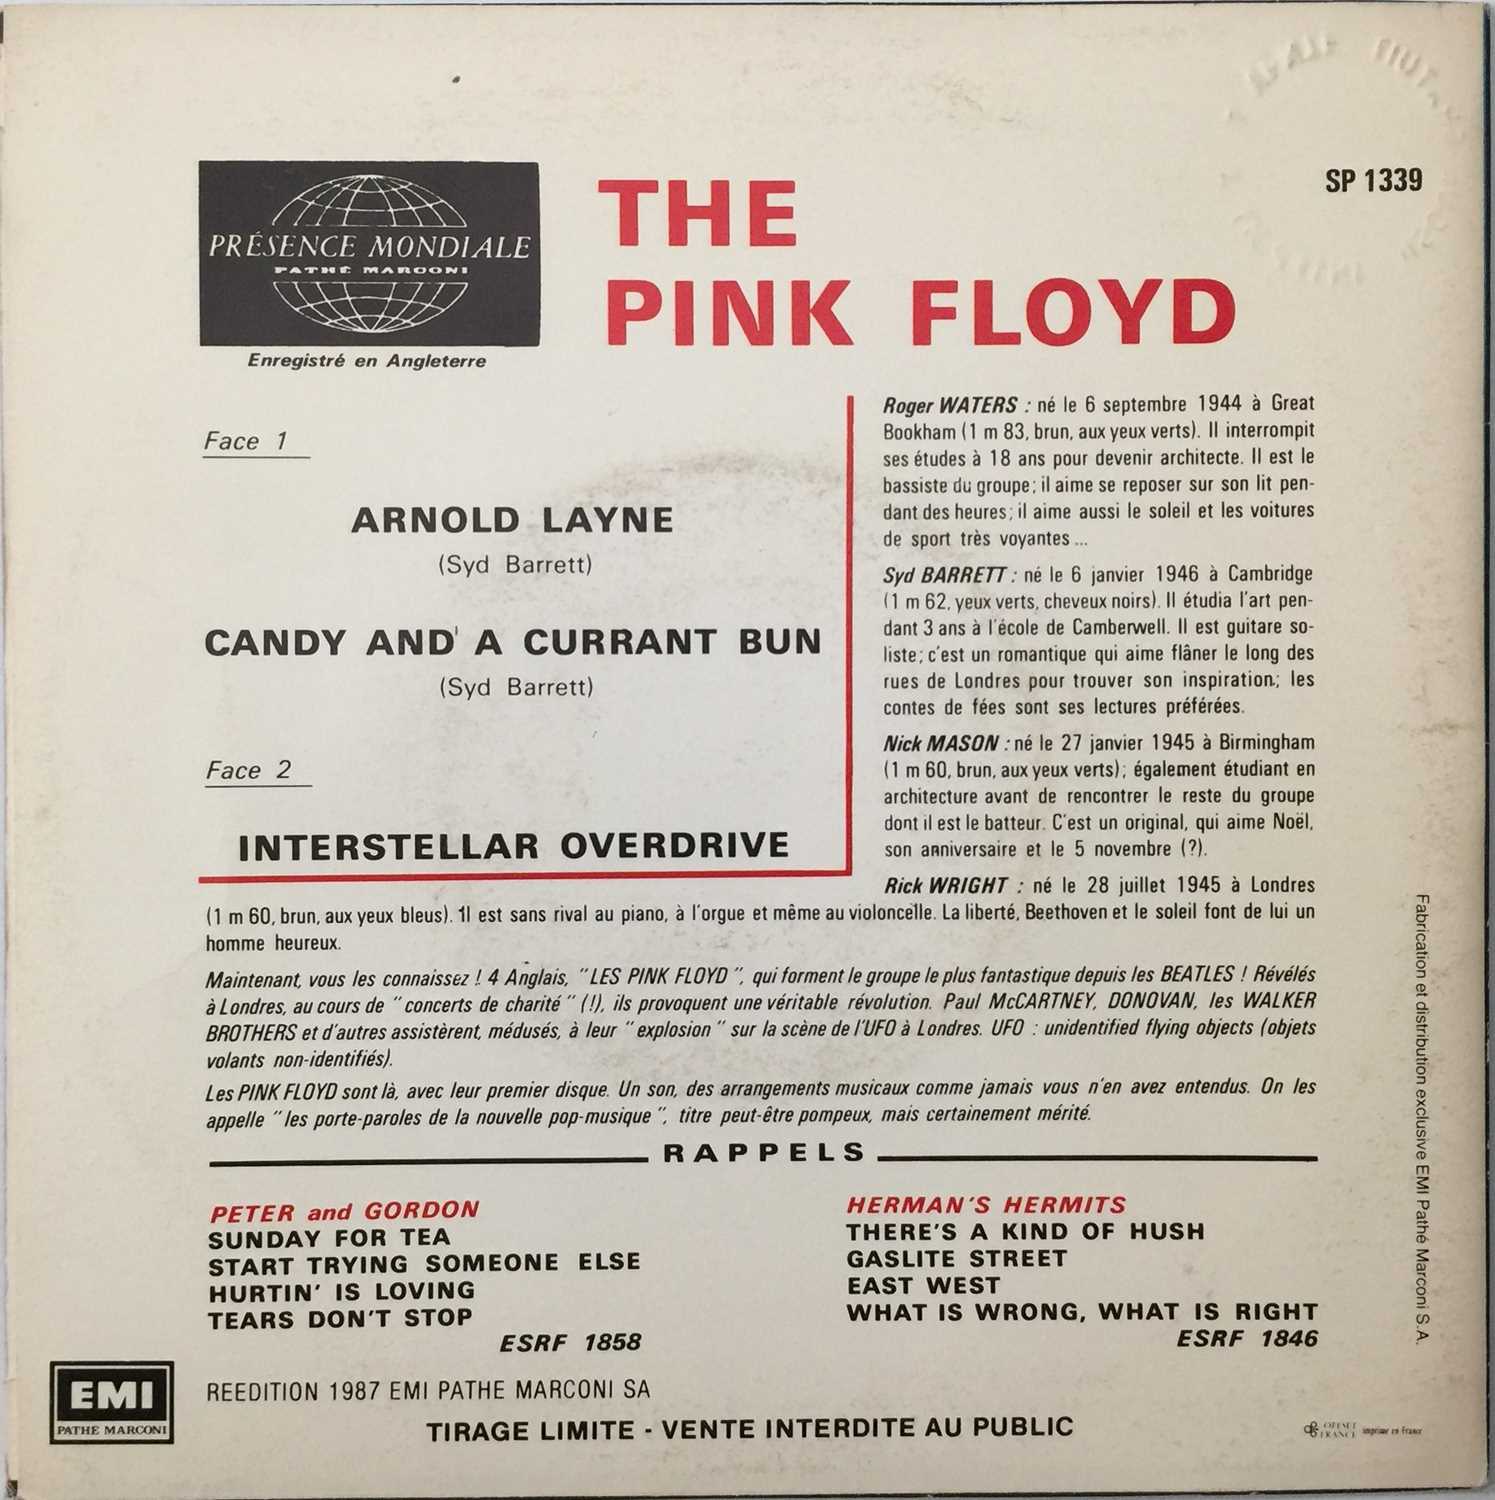 THE PINK FLOYD - ARNOLD LAYNE 7" (1987 FRENCH PROMO - SP 1339) - Image 3 of 5